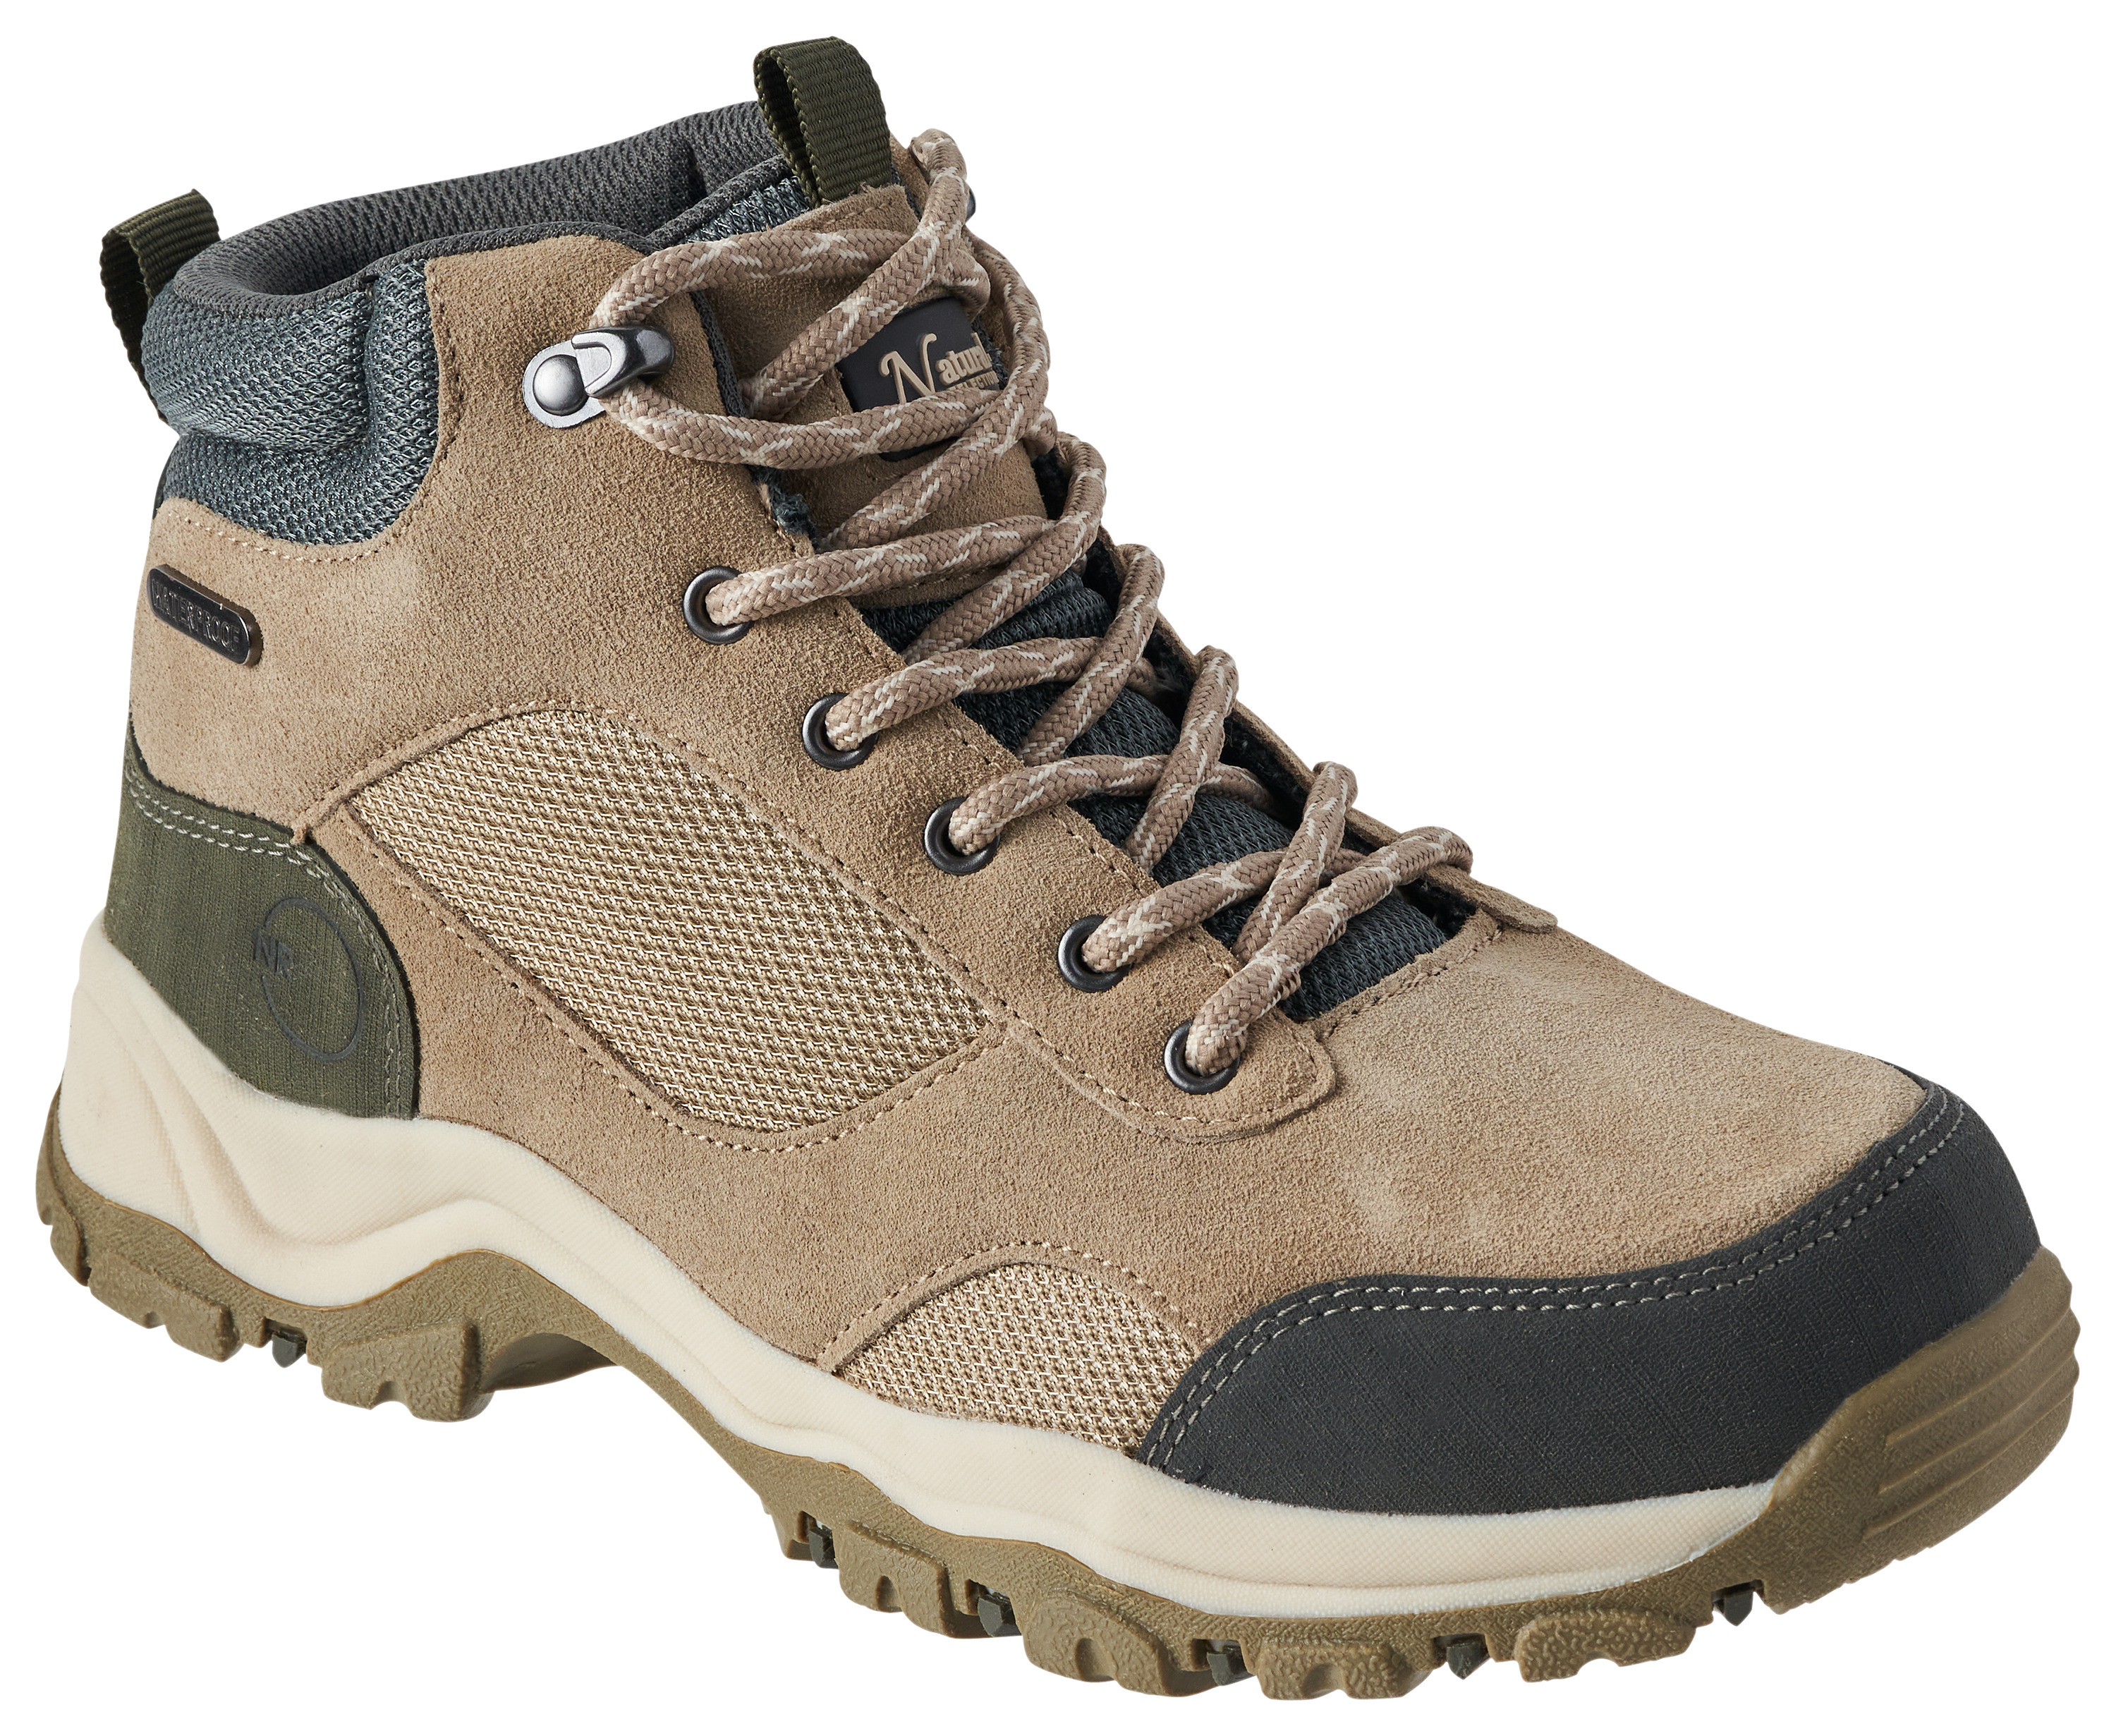 Natural Reflections Skyline II Mid Waterproof Hiking Boots for Ladies - Tan/Charcoal - 11M